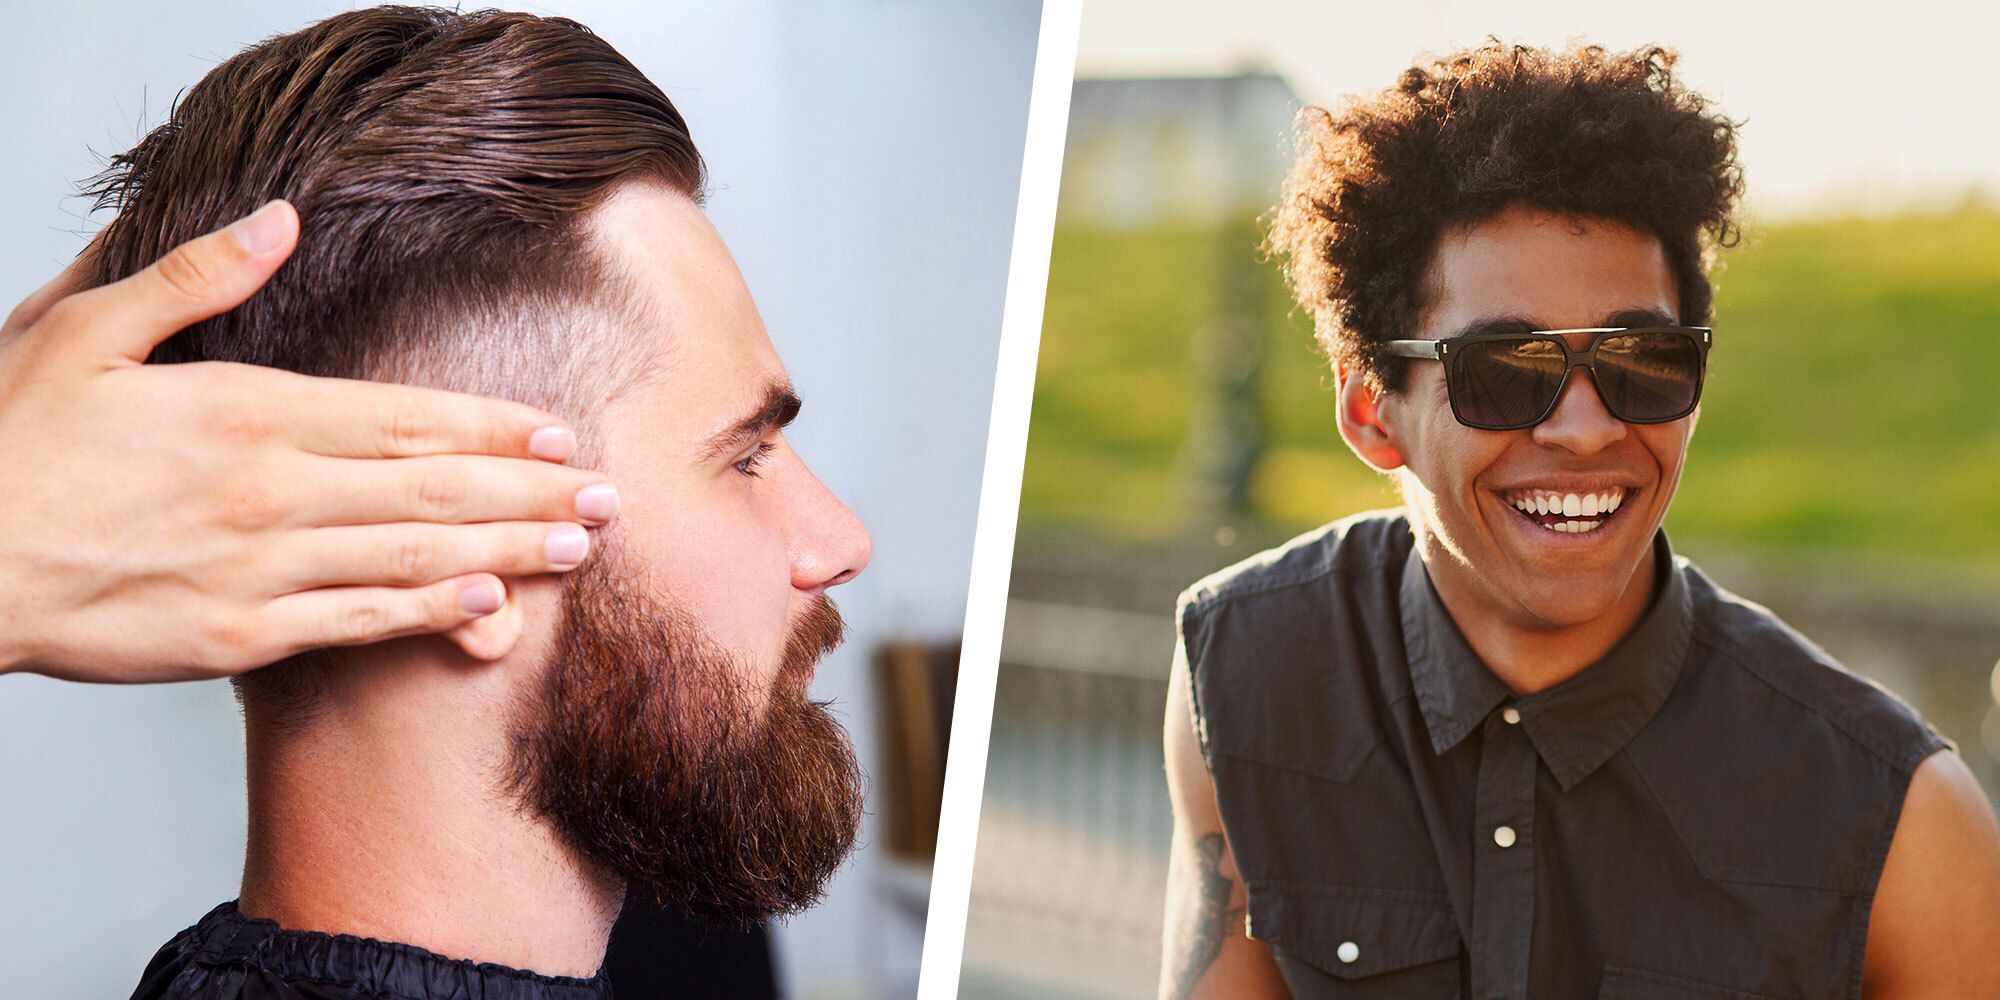 Perms for Men Guide: Everything You Need To Know About Getting A Perm